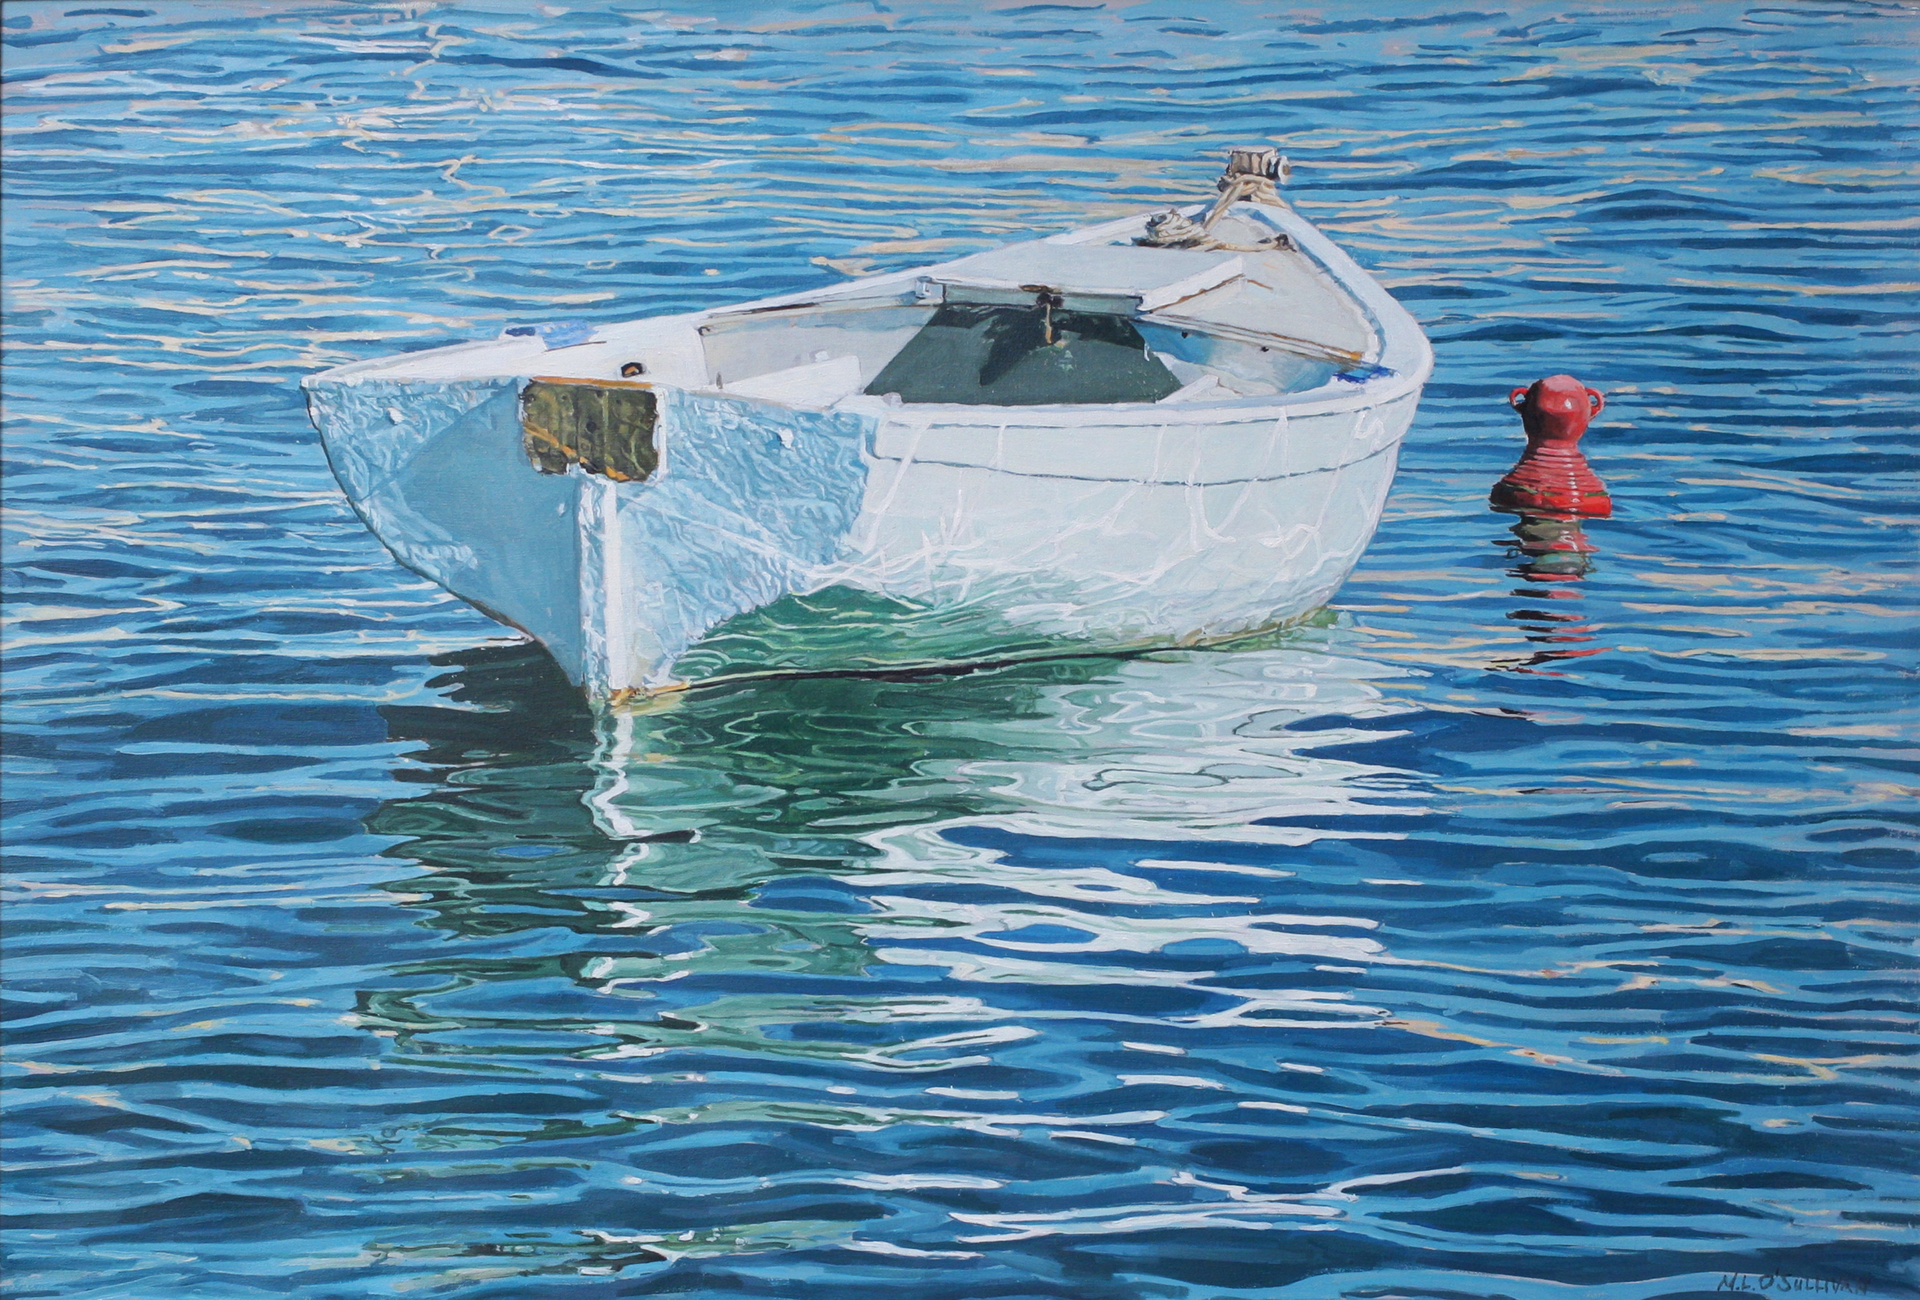 White Boat with Red Buoy by Mary-Louise O'Sullivan